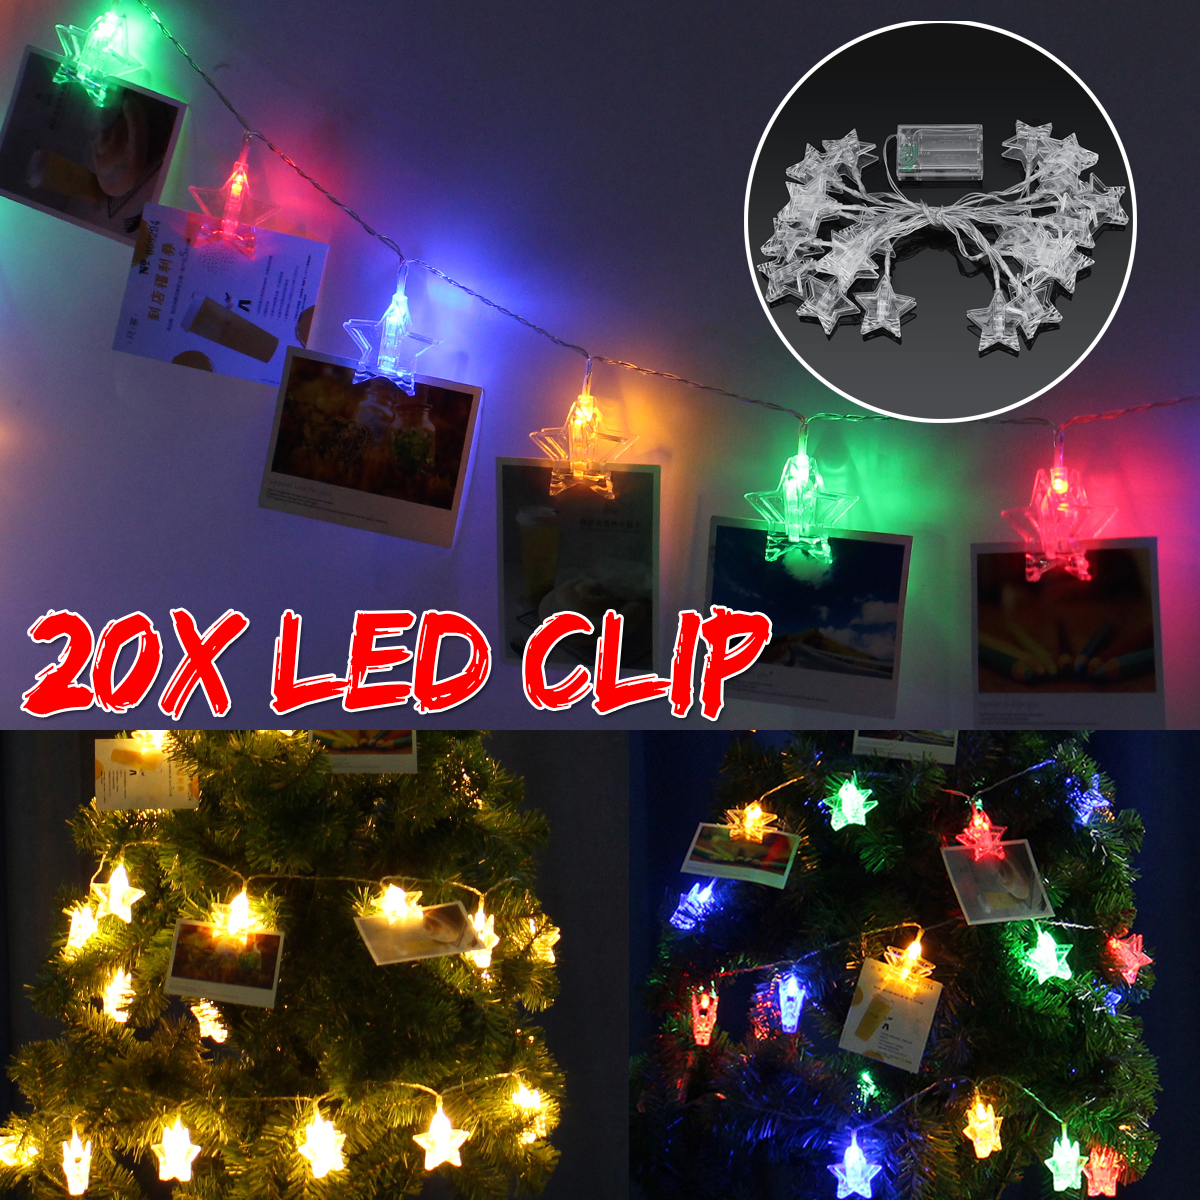 3M-20-LED-Star-Photp-Clip-Fairy-String-Light-Party-Christmas-Wedding-Outdoor-Home-Decor-Lamp-1354715-1